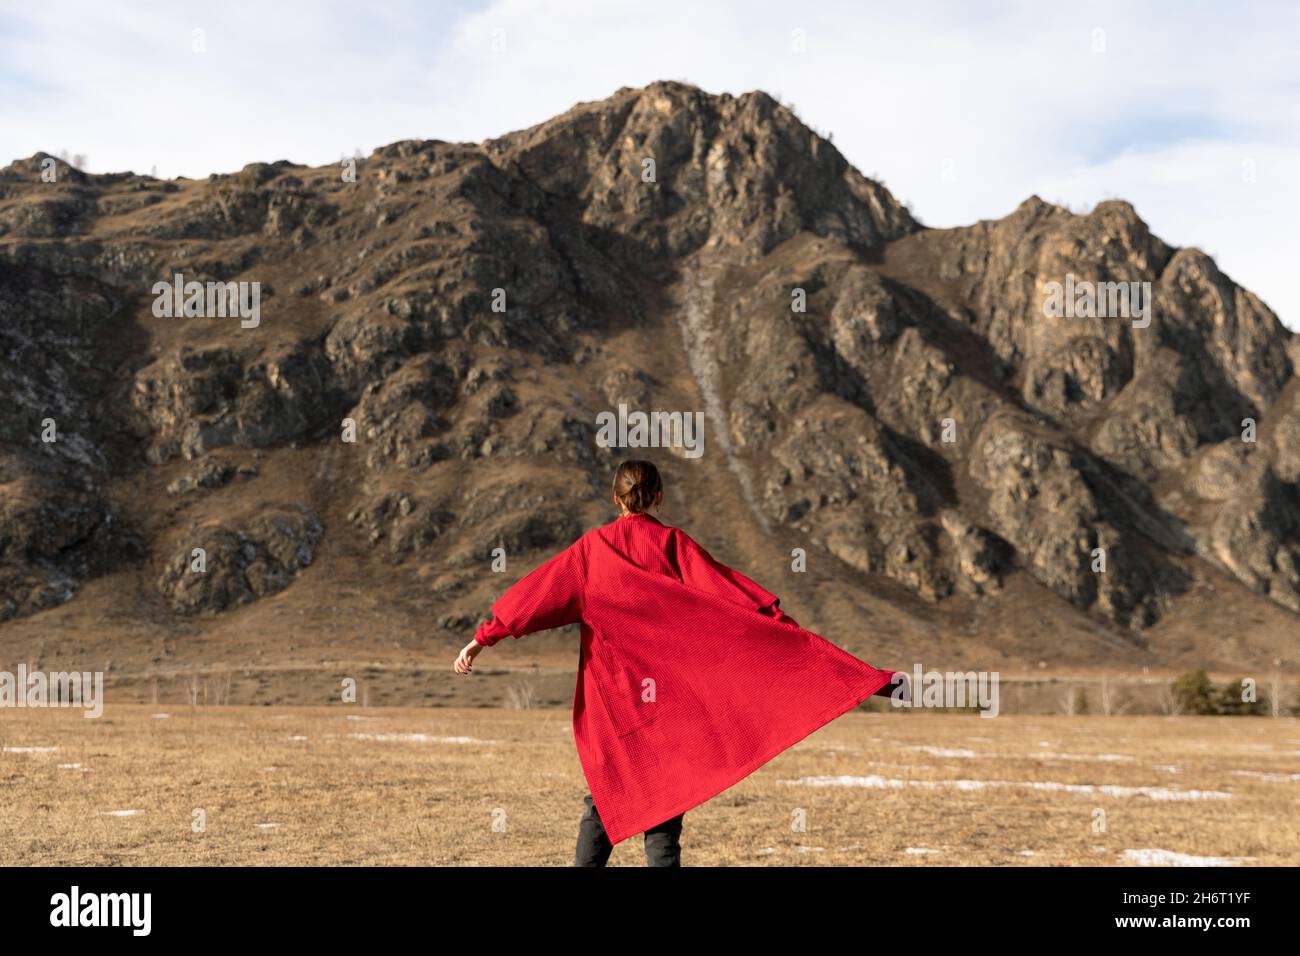 Woman from back in a red bathrobe runs next to the mountain Stock Photo